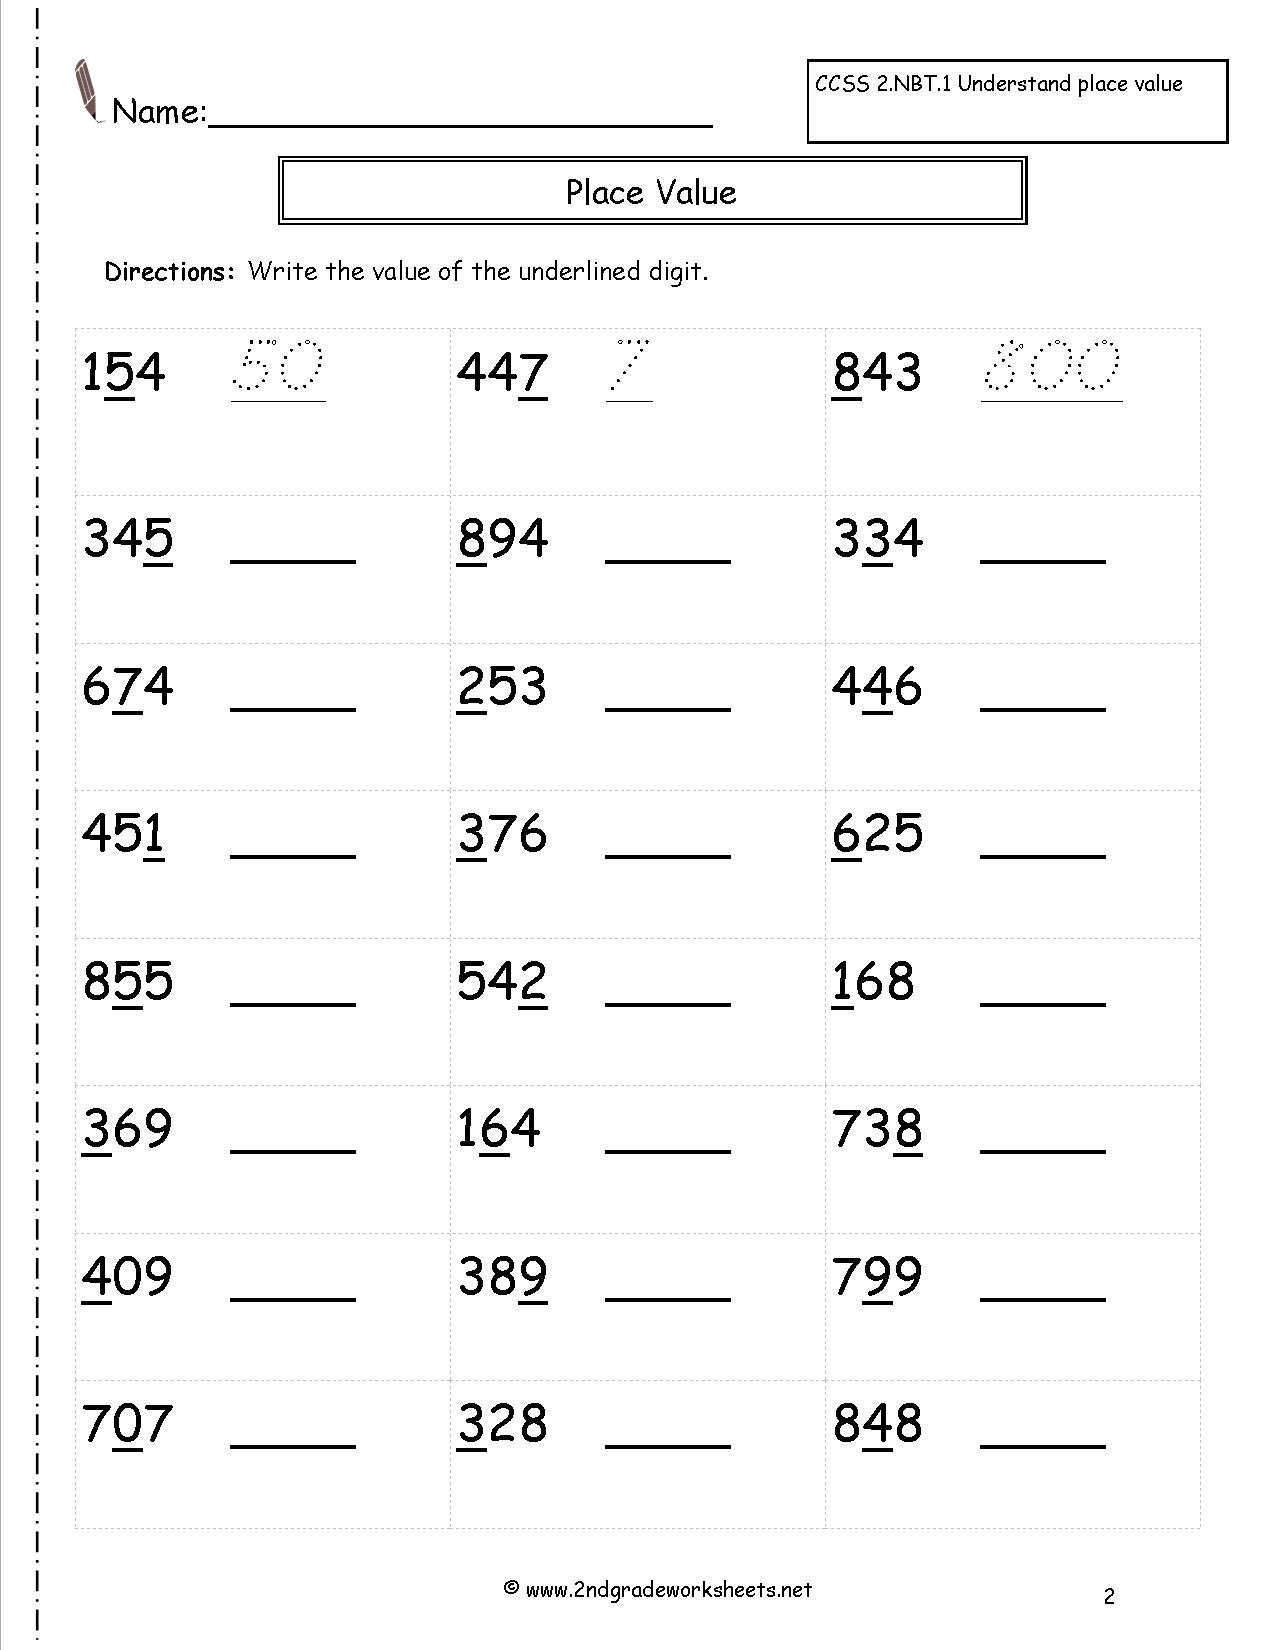 4th-grade-fractions-worksheets-common-core-math-worksheet-grade-2-place